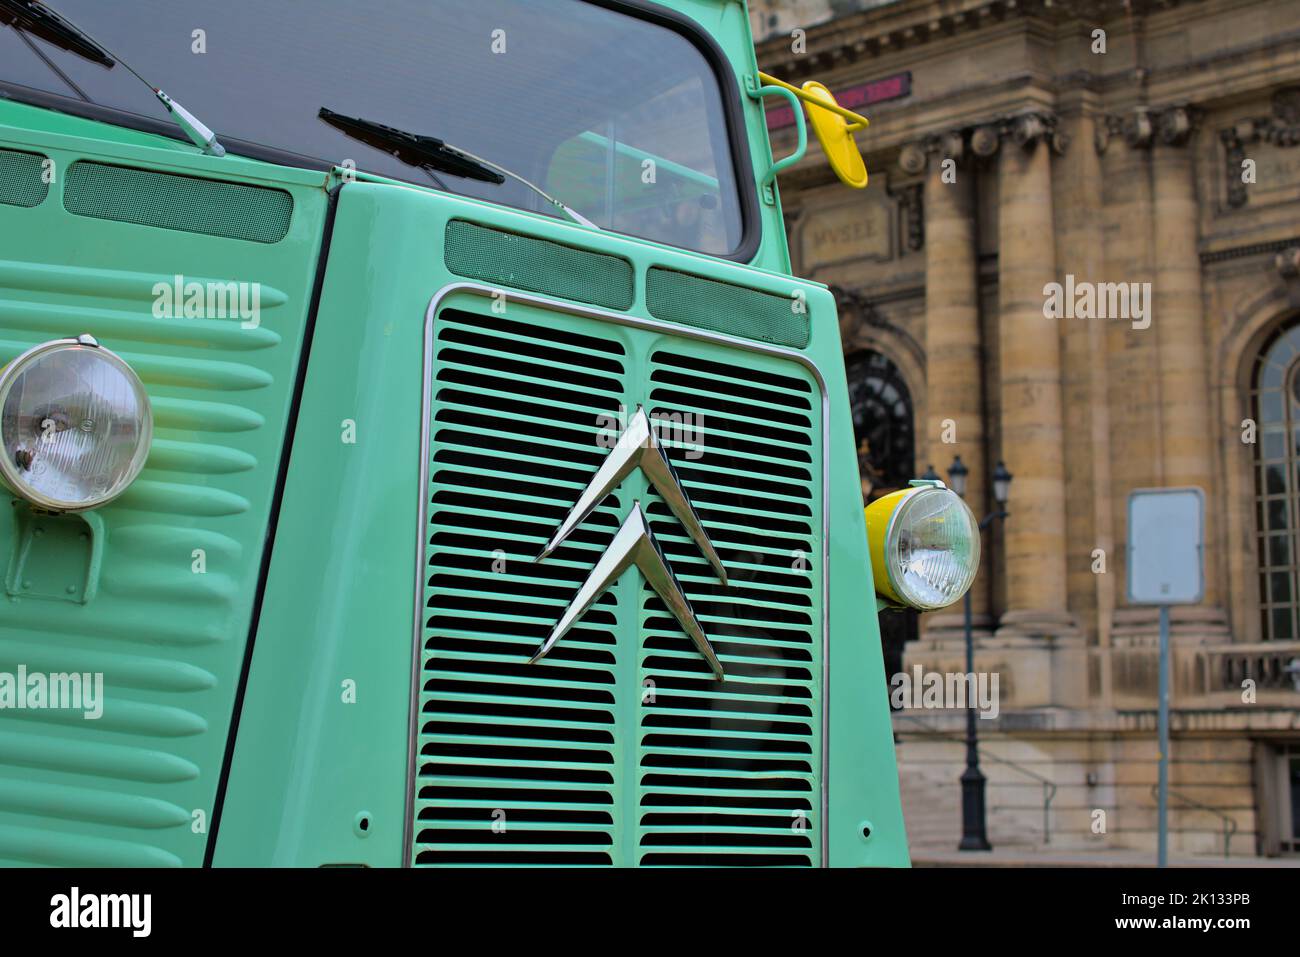 Aquamarine Citroën H Van parked in front of the museum of art and history in Geneve Stock Photo